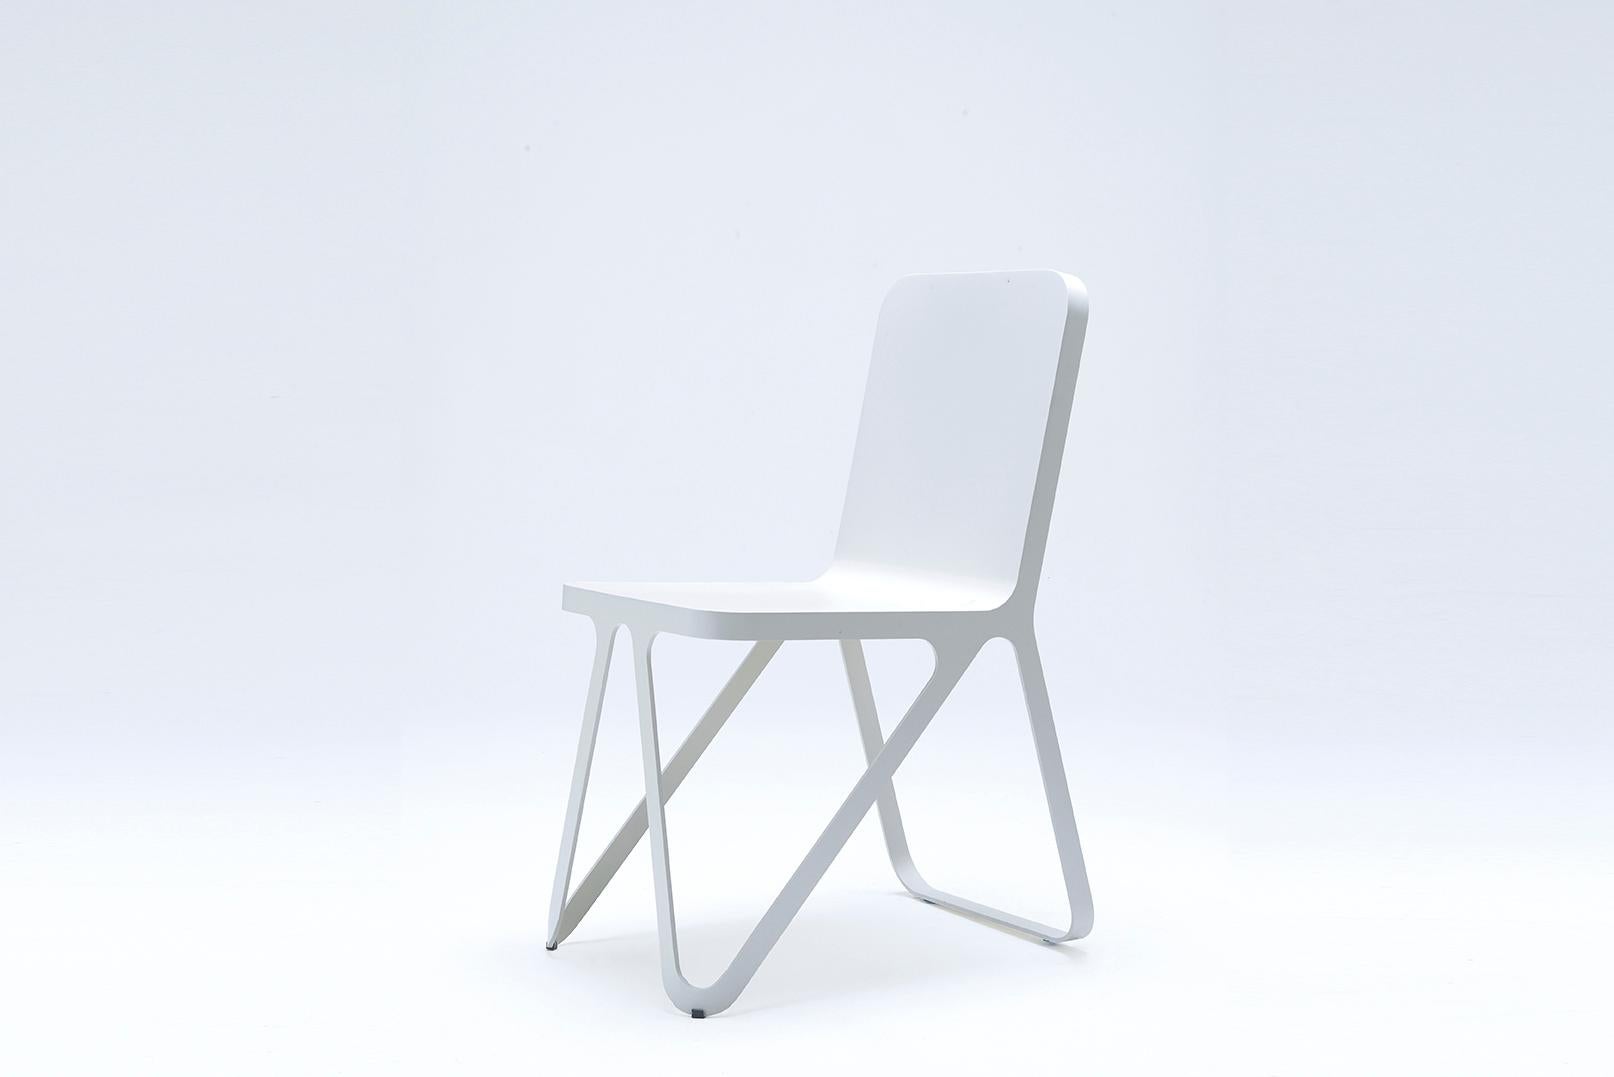 Graphite grey loop chair by Sebastian Scherer
Dimensions: D57x w40 x H80 cm
Material: Aluminium.
Weight: 51 kg.
Also available: Colours: Snow white / light sand / sun yellow / clay orange / rust red / space blue / graphite grey / dark bronze /